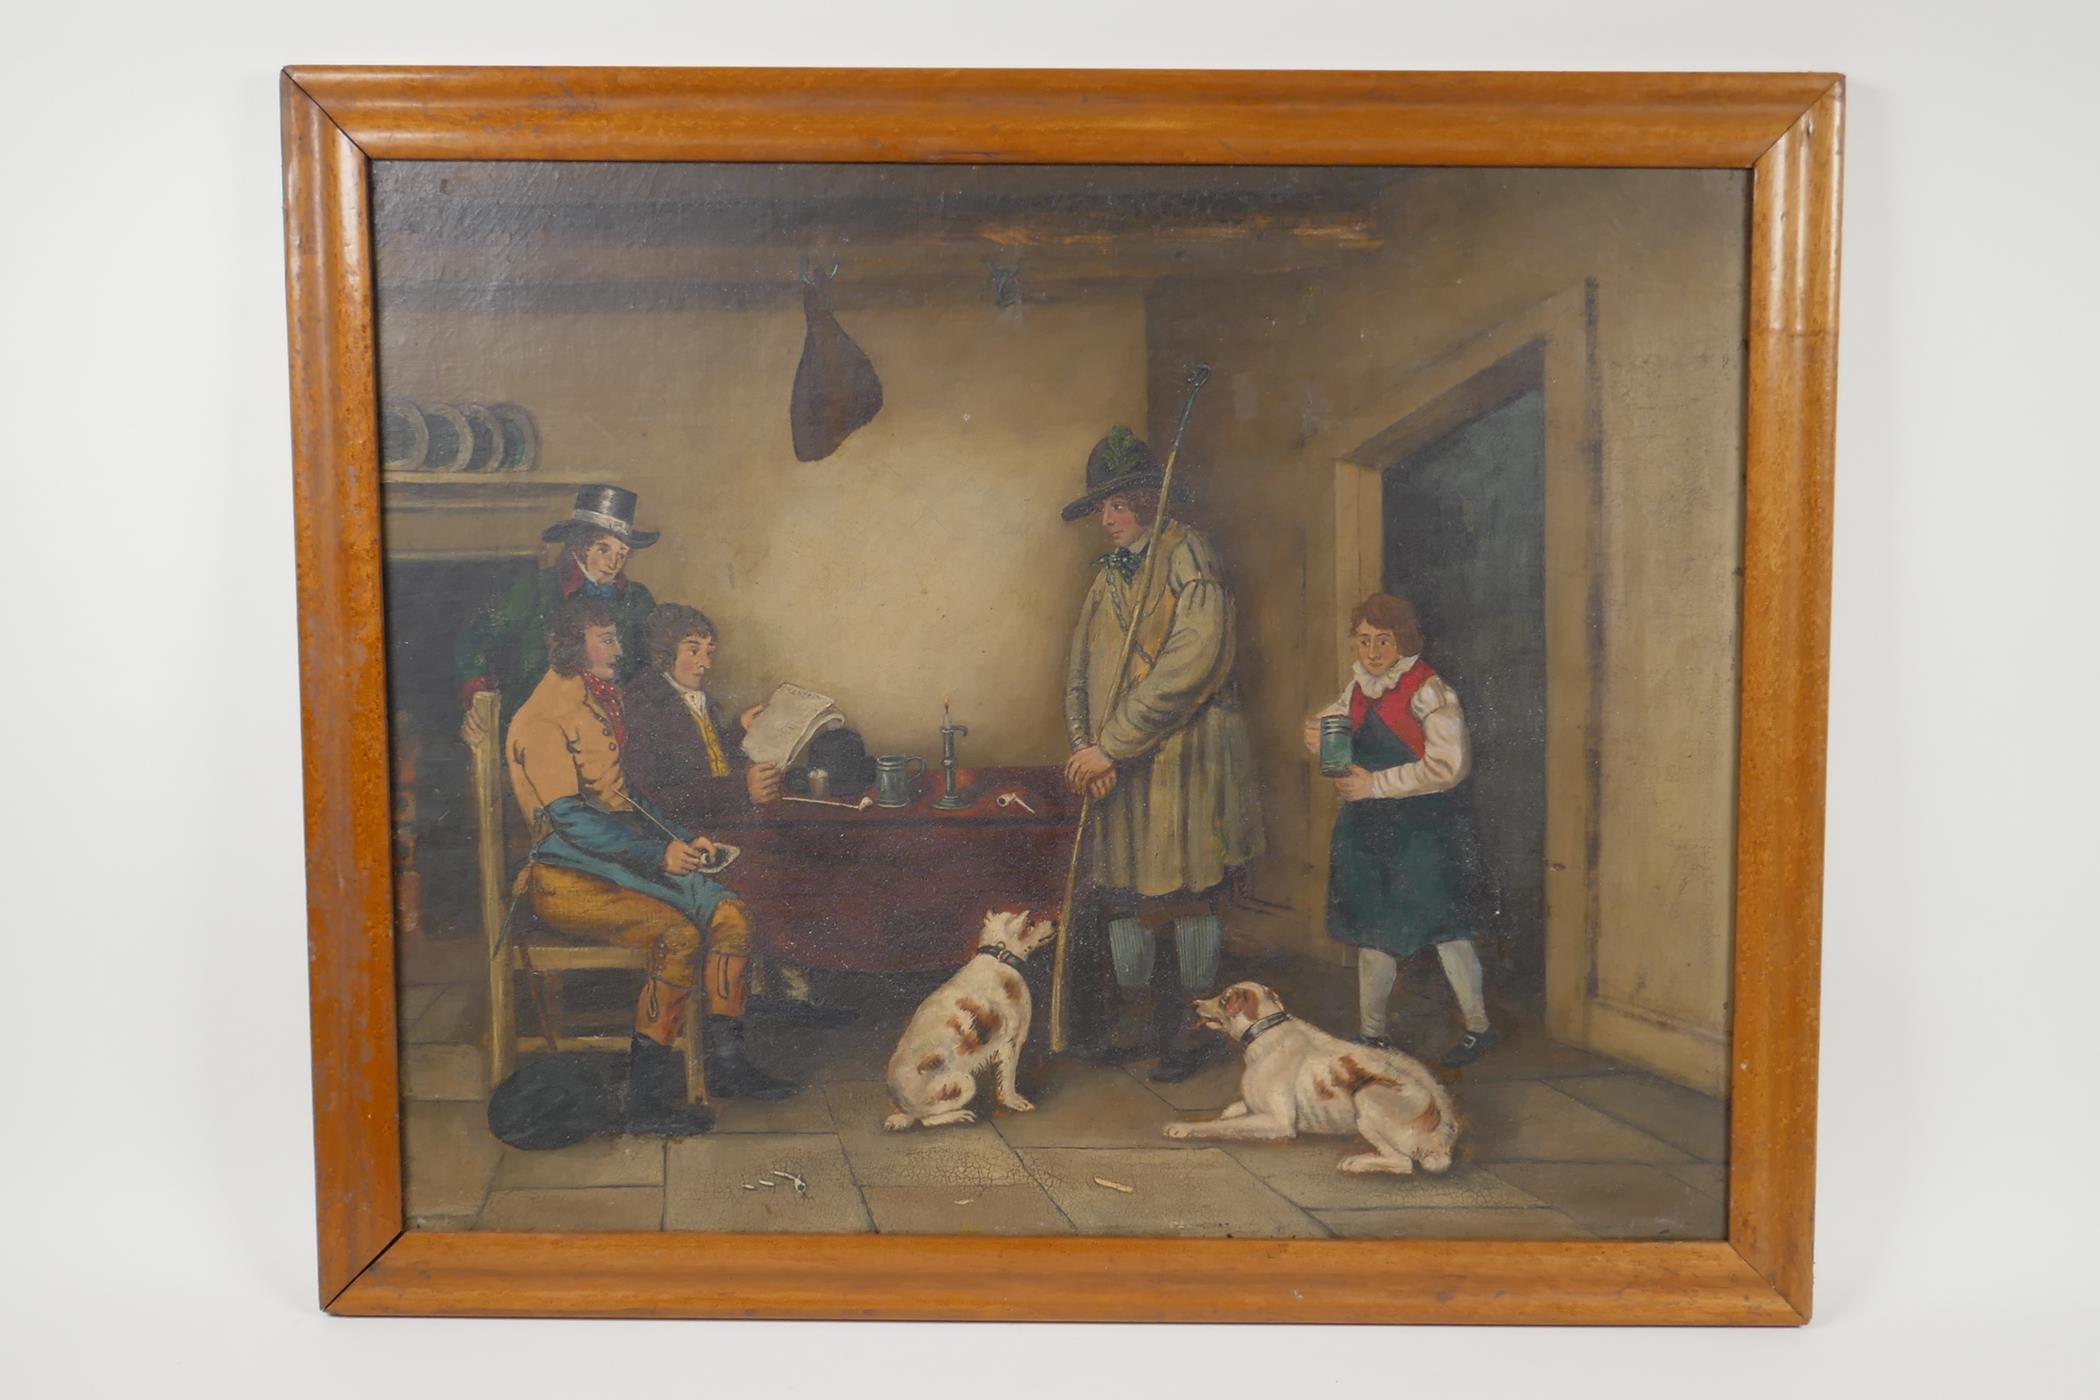 Interior scene with figures and dogs, C19th in a maple wood frame, oil on canvas, 16" x 21" - Image 2 of 4